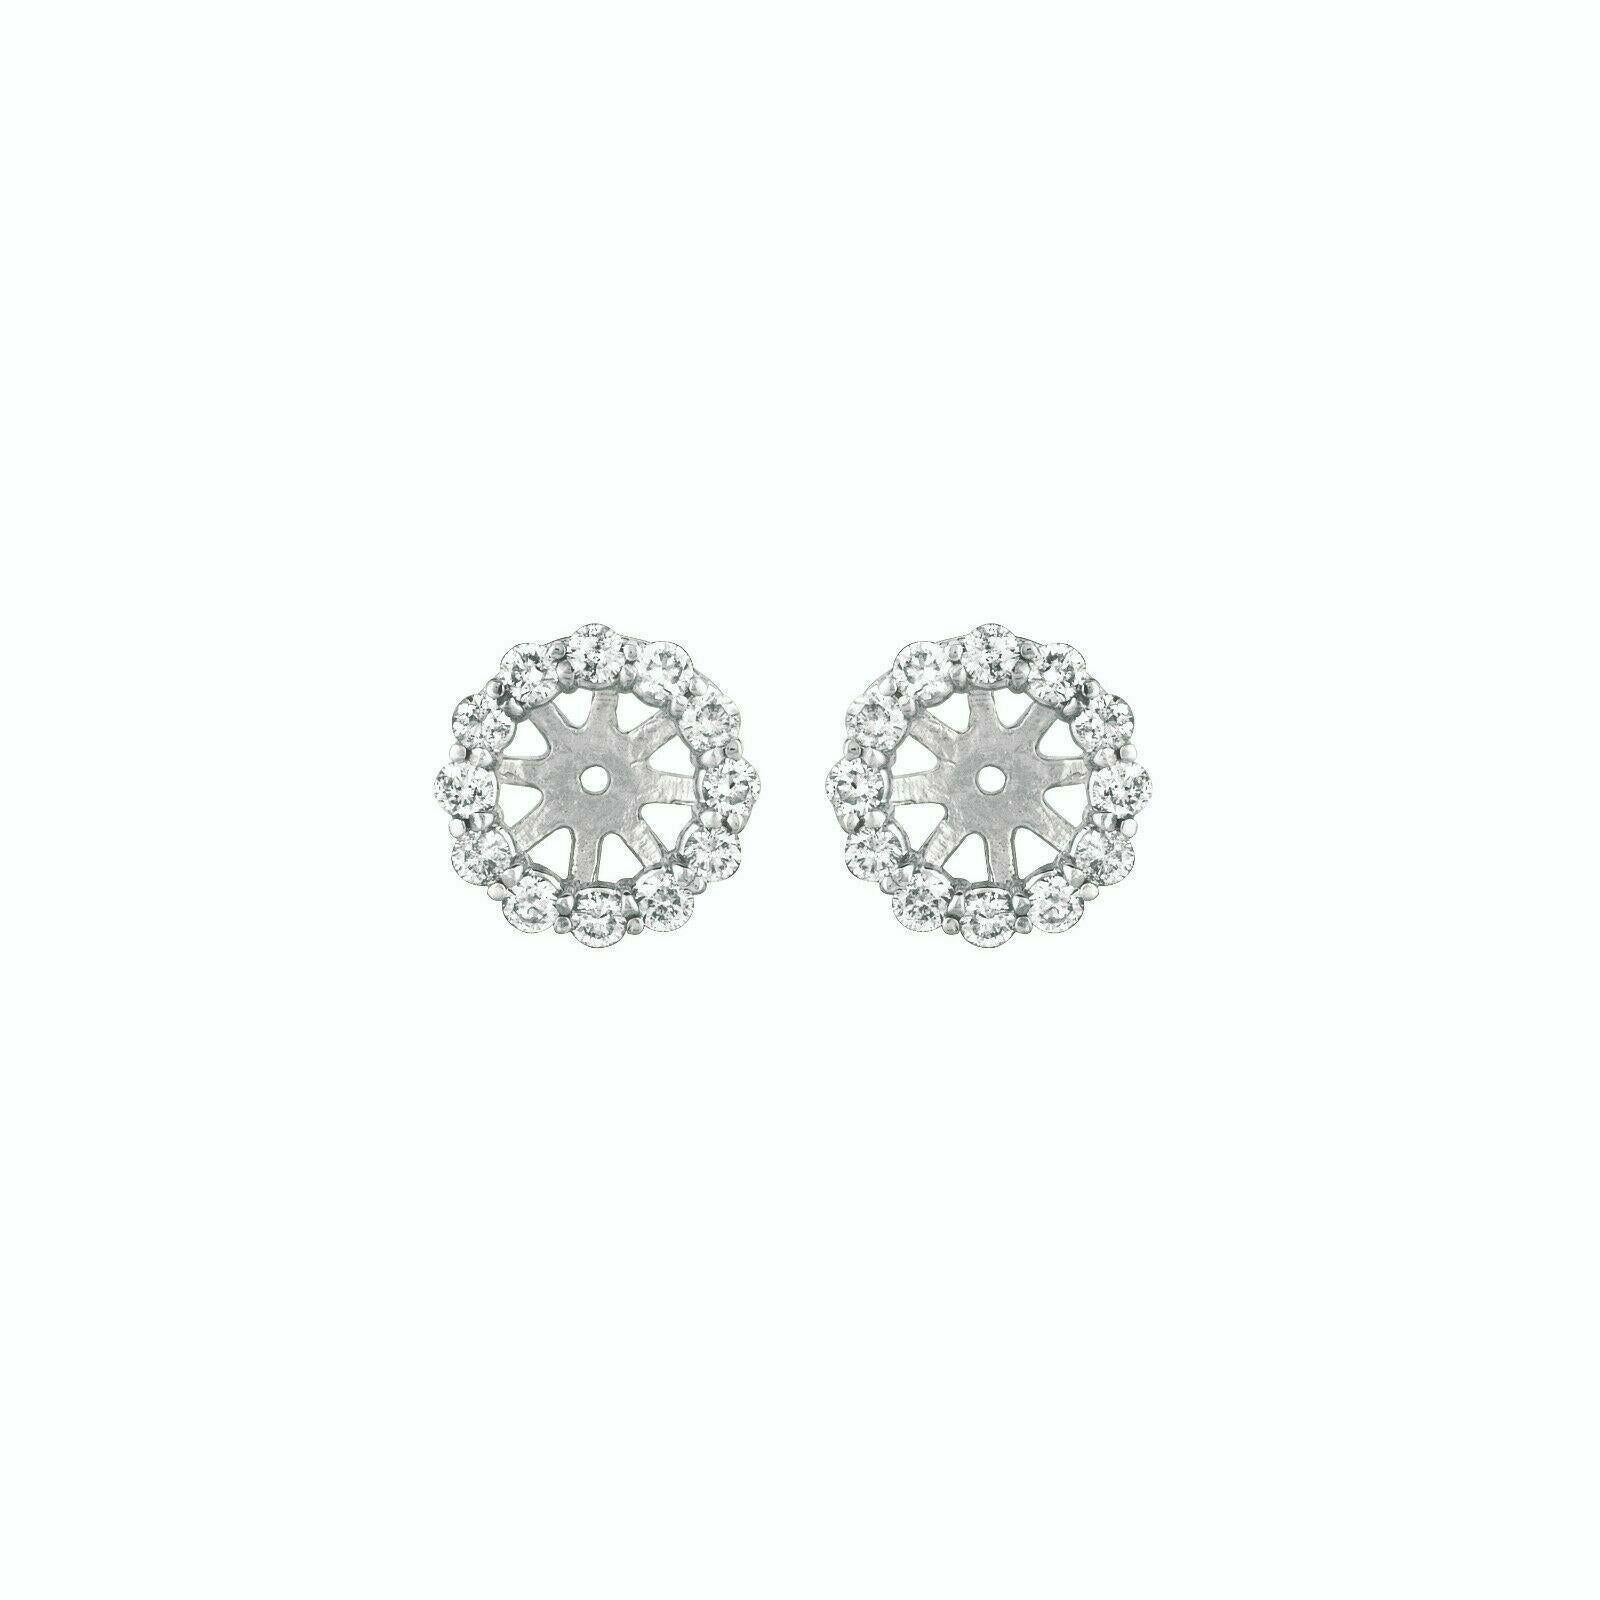 0.58 Ct 2 pointers Natural Diamond Jacket Earrings 14K White Gold center 7 MM

100% Natural, Not Enhanced in any way Round Cut Diamond Earrings
0.58CT
G-H 
SI  
14K White Gold  1.20 gram, prong style 
3/8 inches in width
center is for 7mm stone 
28